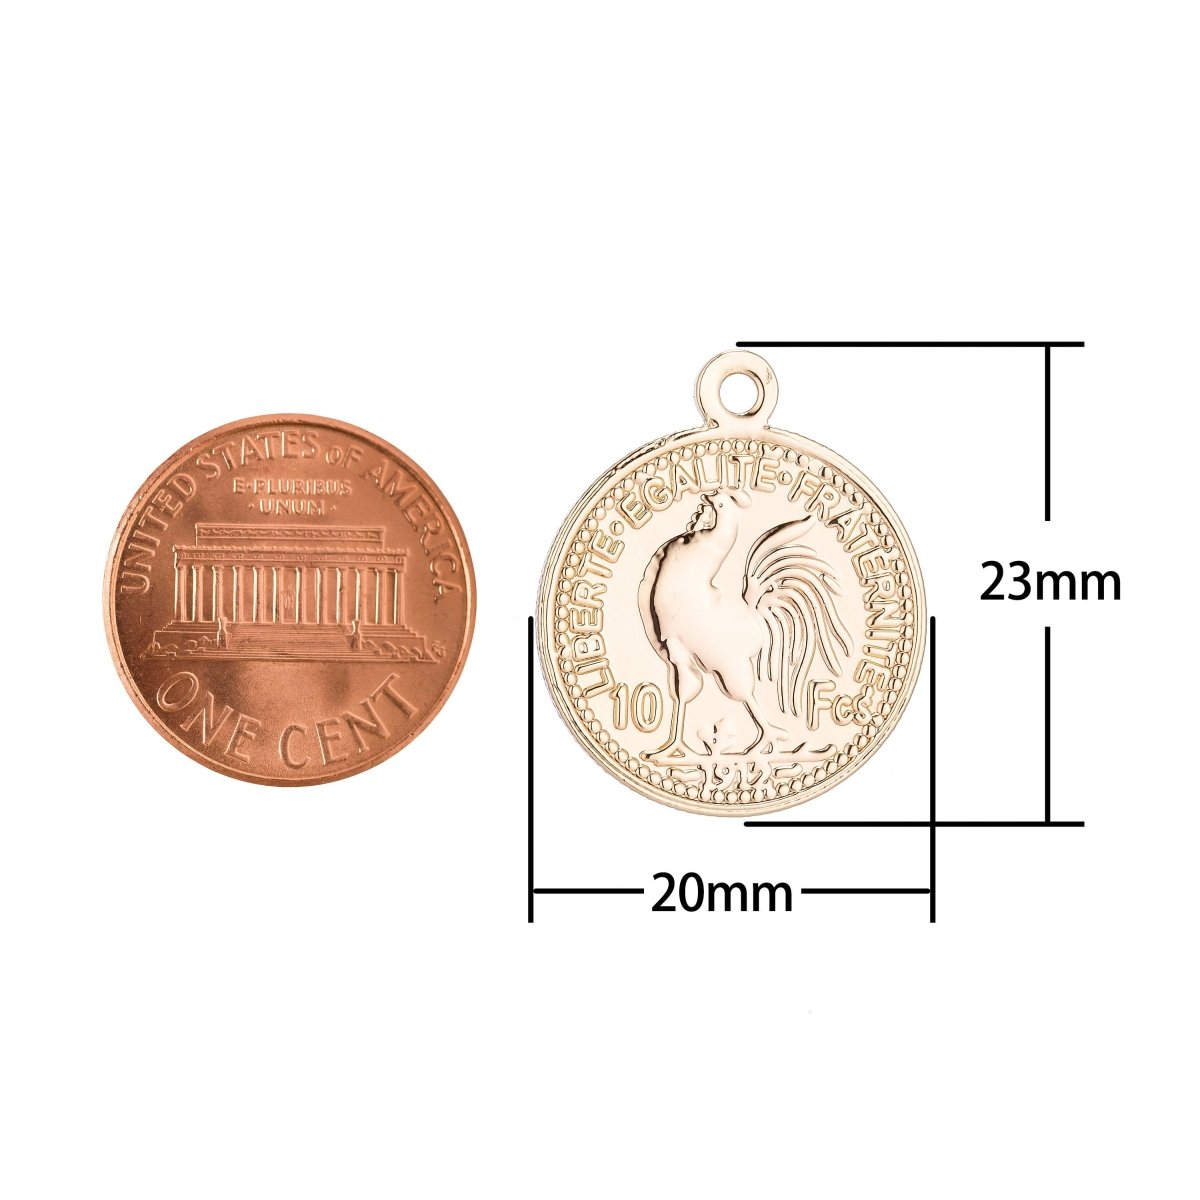 18K Gold Filled 10 Francs Marianne Rooster Gold Coin French Coin Charm Pendant for Layer Necklace Bracelet Earring Jewelry Making Supply, CHGF-105/C-89 - DLUXCA